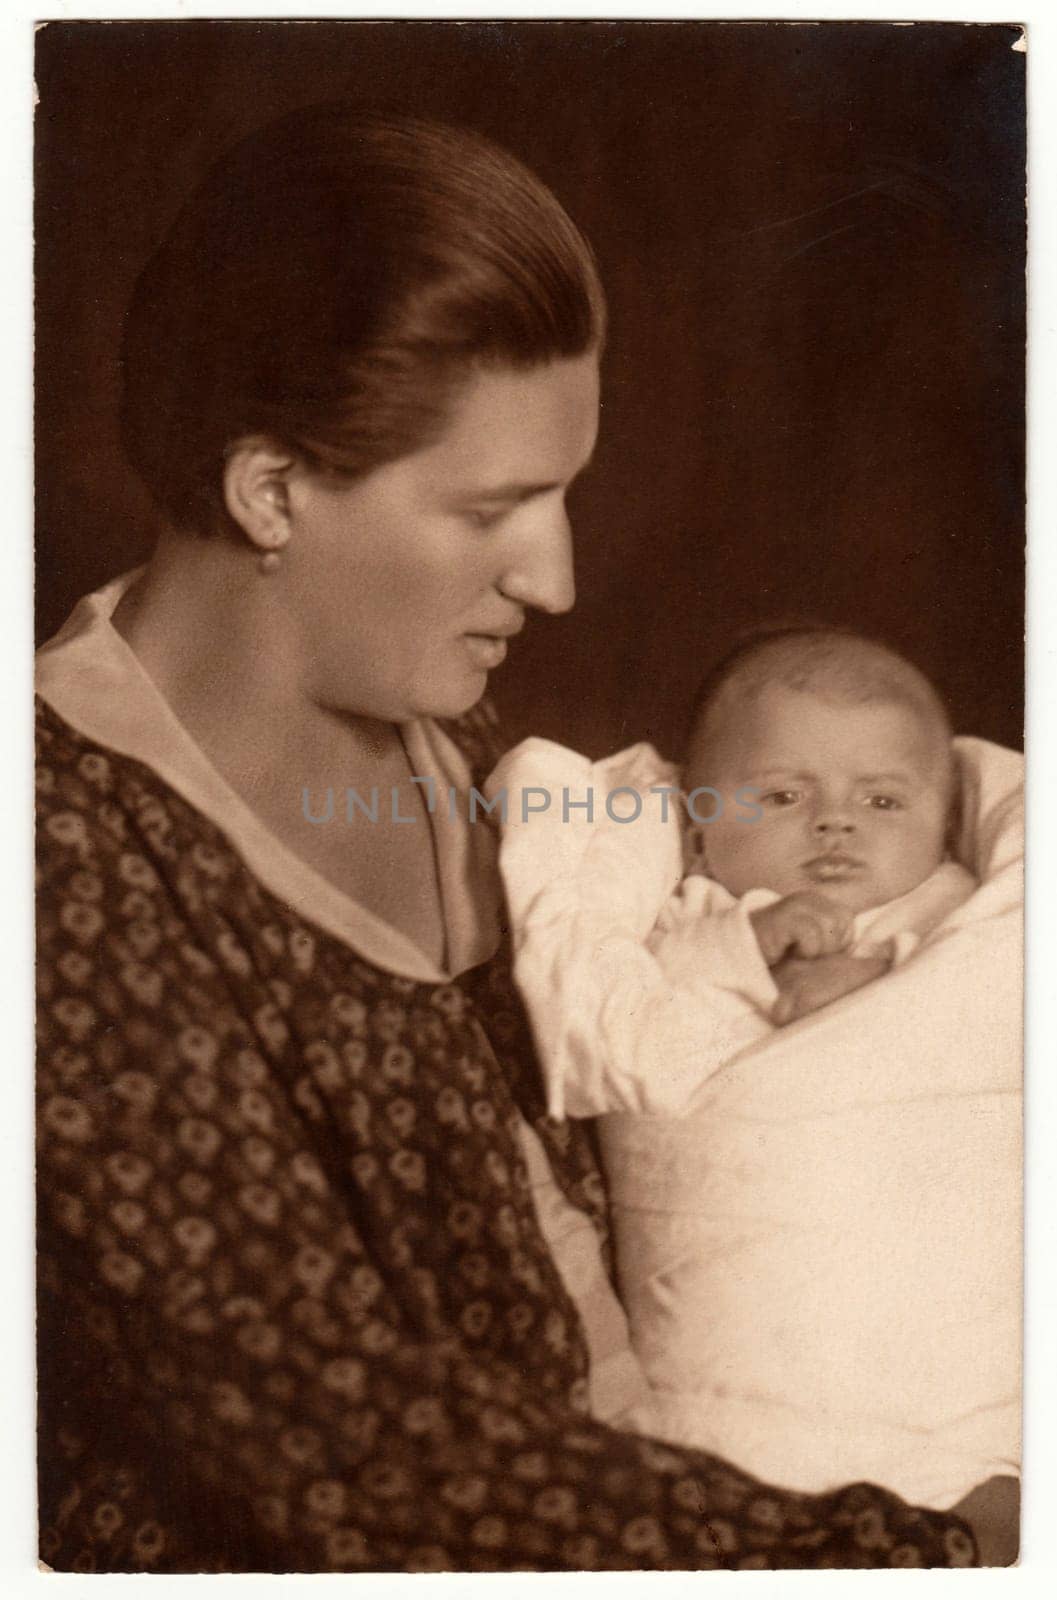 Vintage photo shows woman with baby - newborn in swaddling clothes. Retro black and white studio photography by roman_nerud